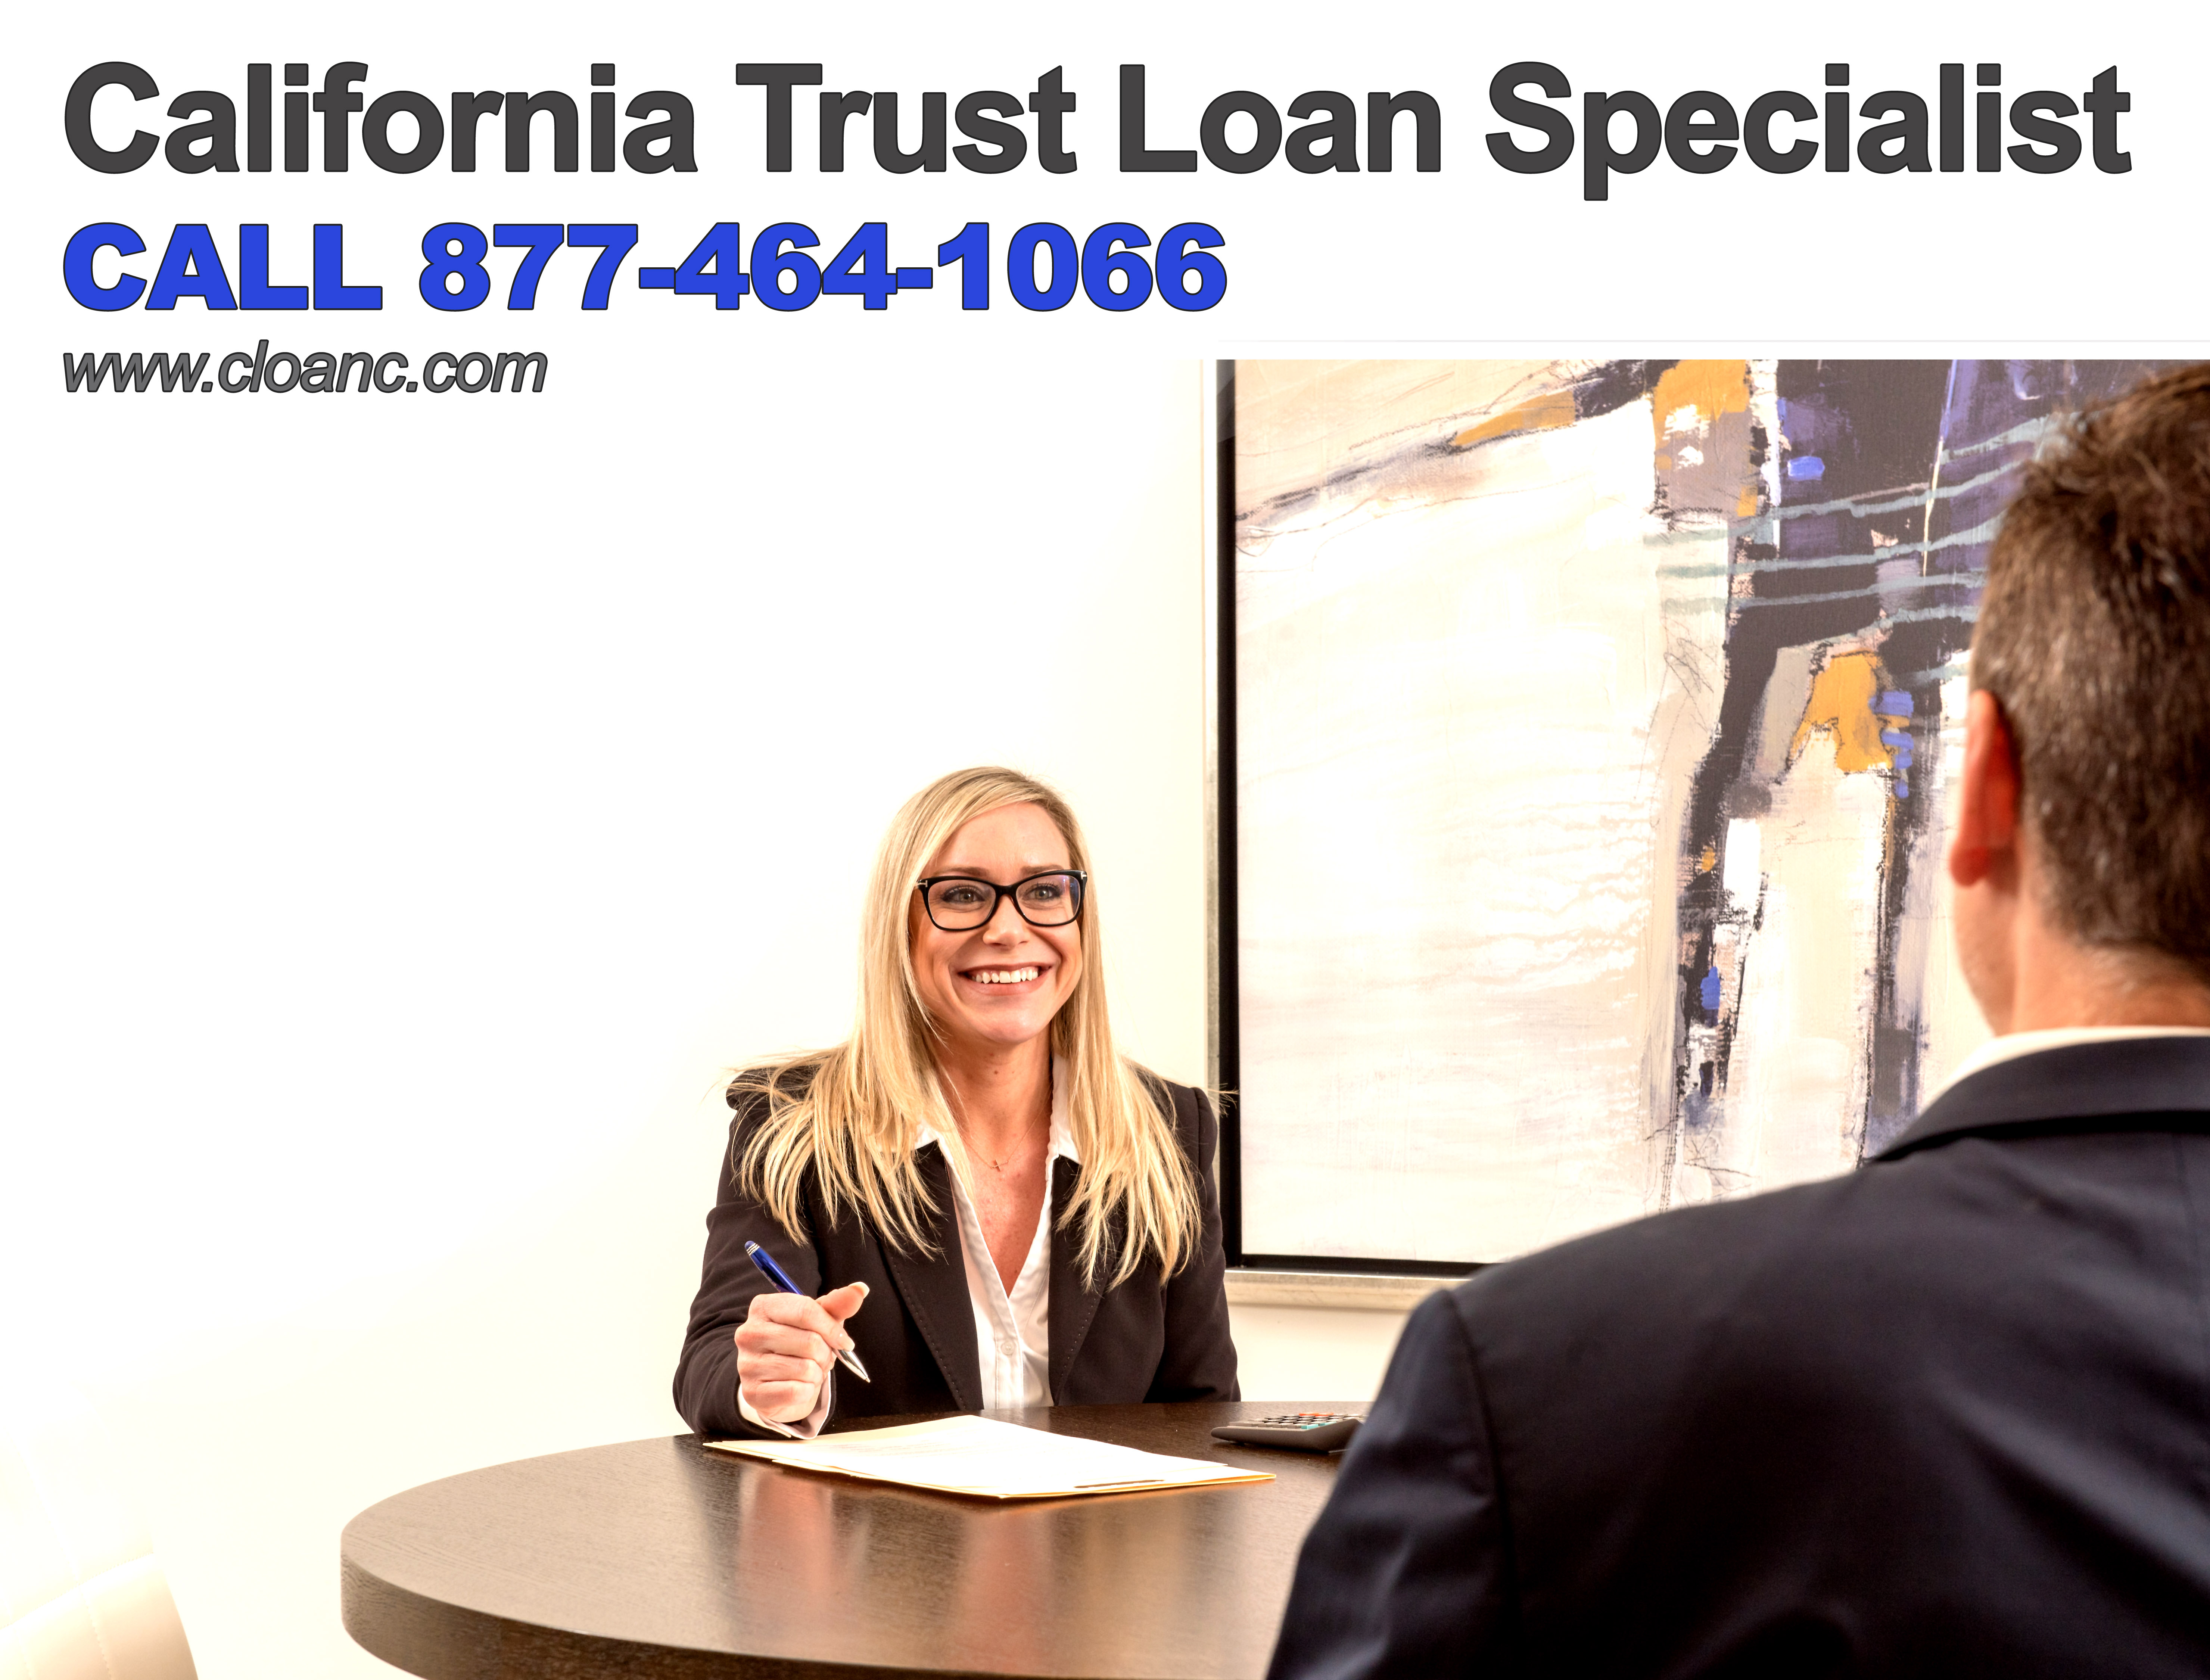 Your California Irrevocable Trust Loan Specialist